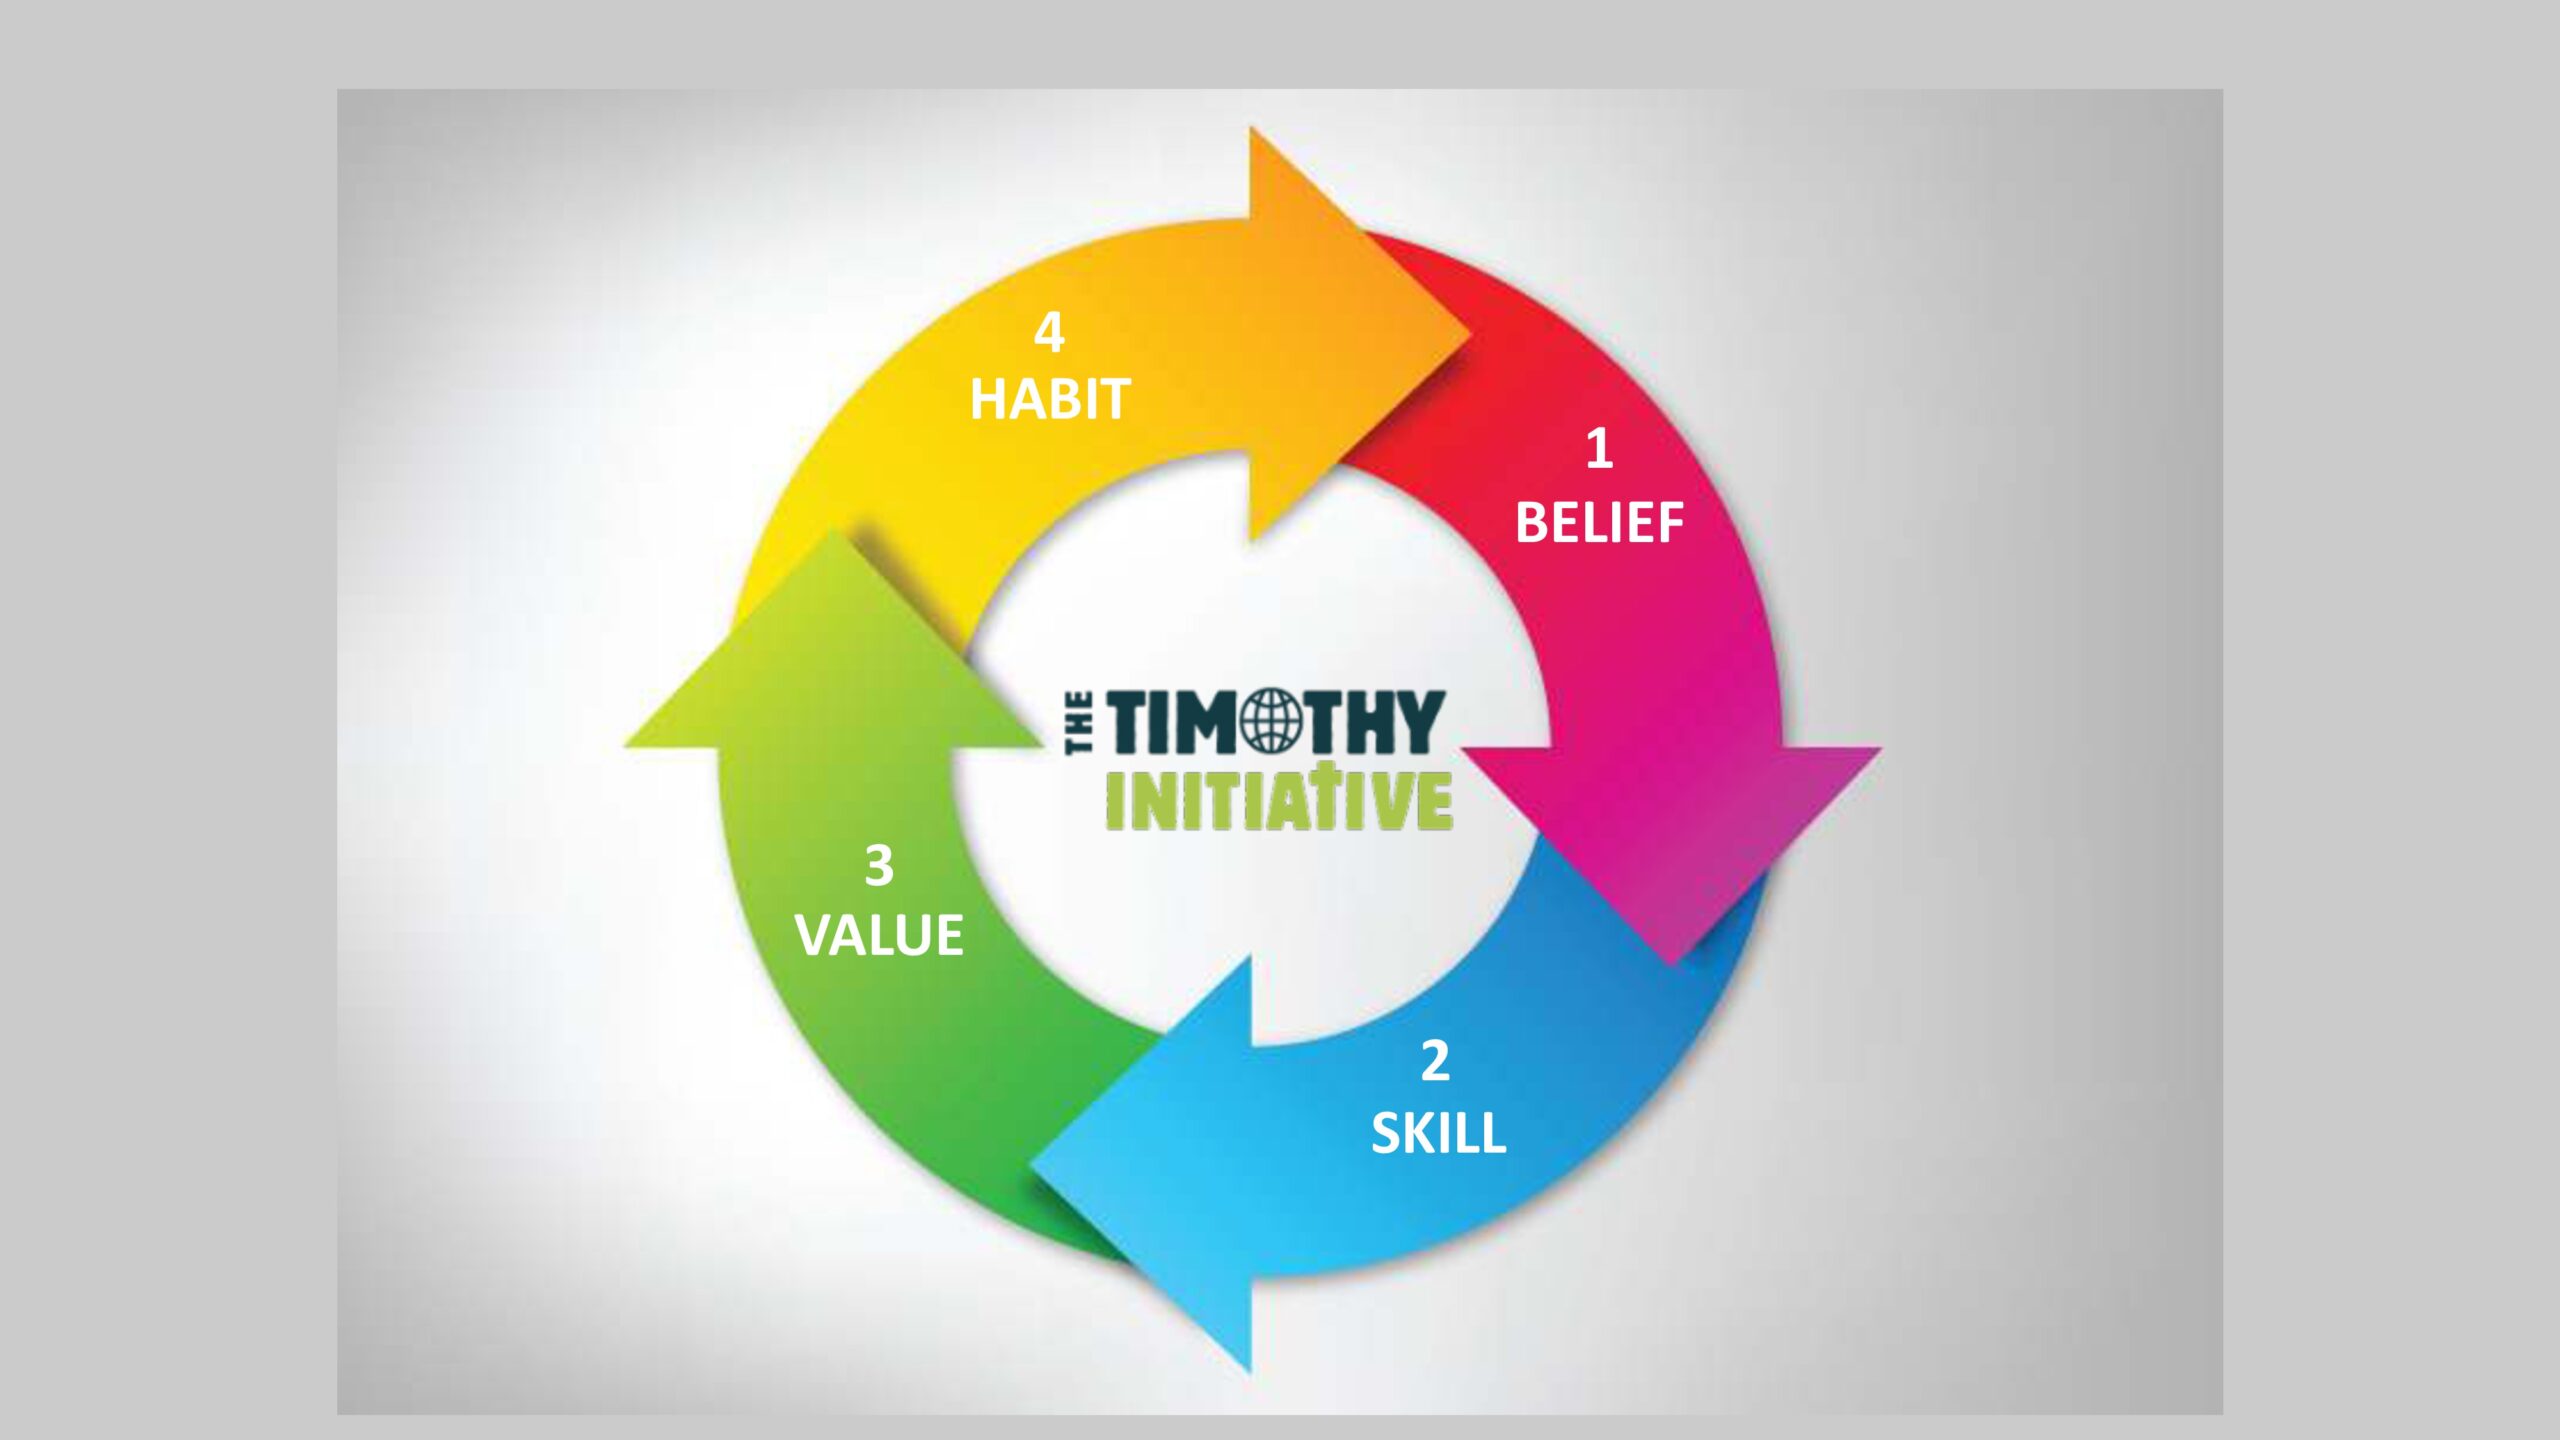 The Four Inter-related Factors at the Heart of the TTI Training Method